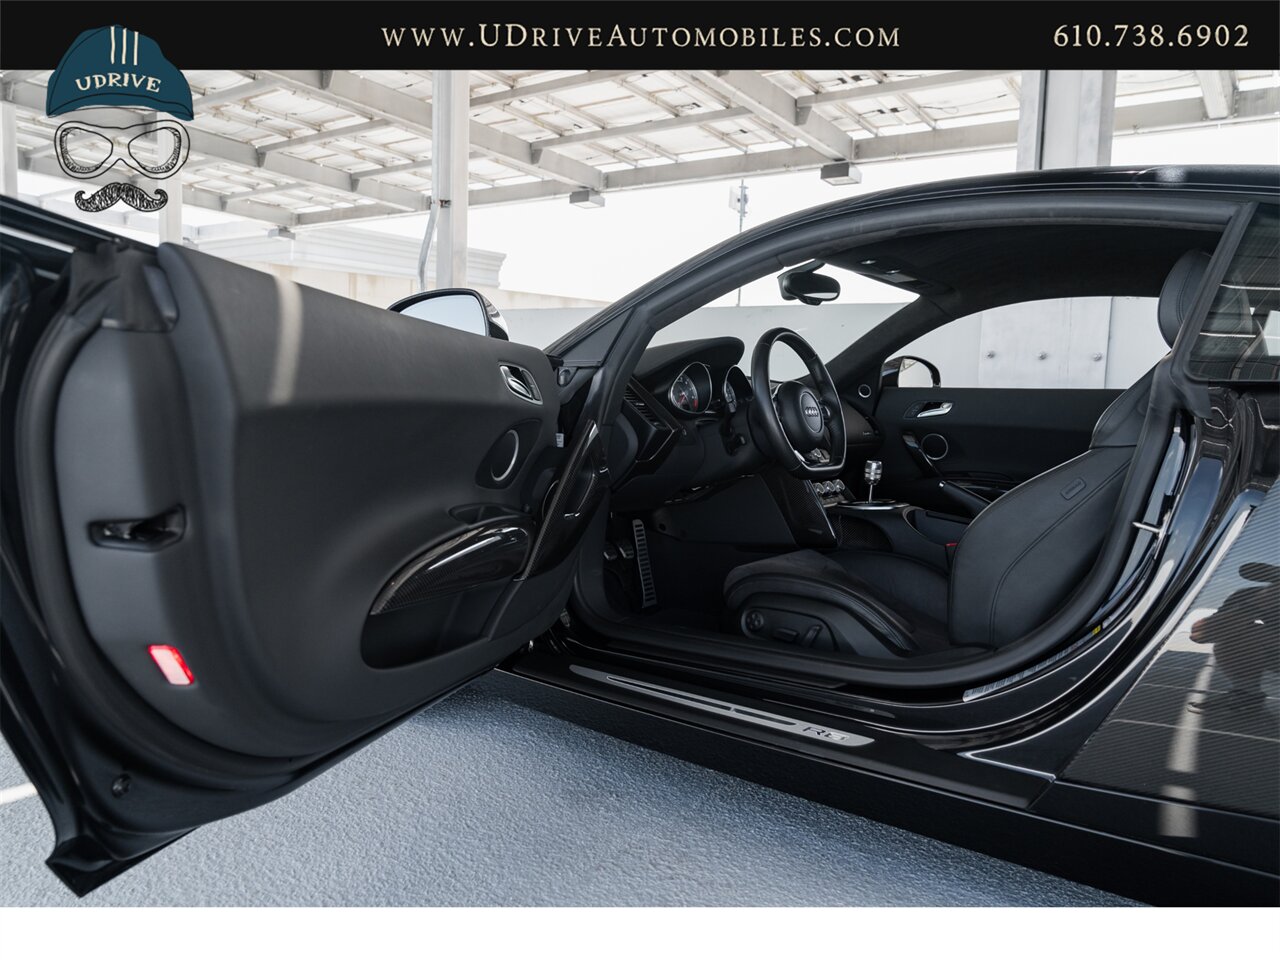 2012 Audi R8 4.2 Quattro  6 Speed Manual 1 Owner Service History - Photo 28 - West Chester, PA 19382